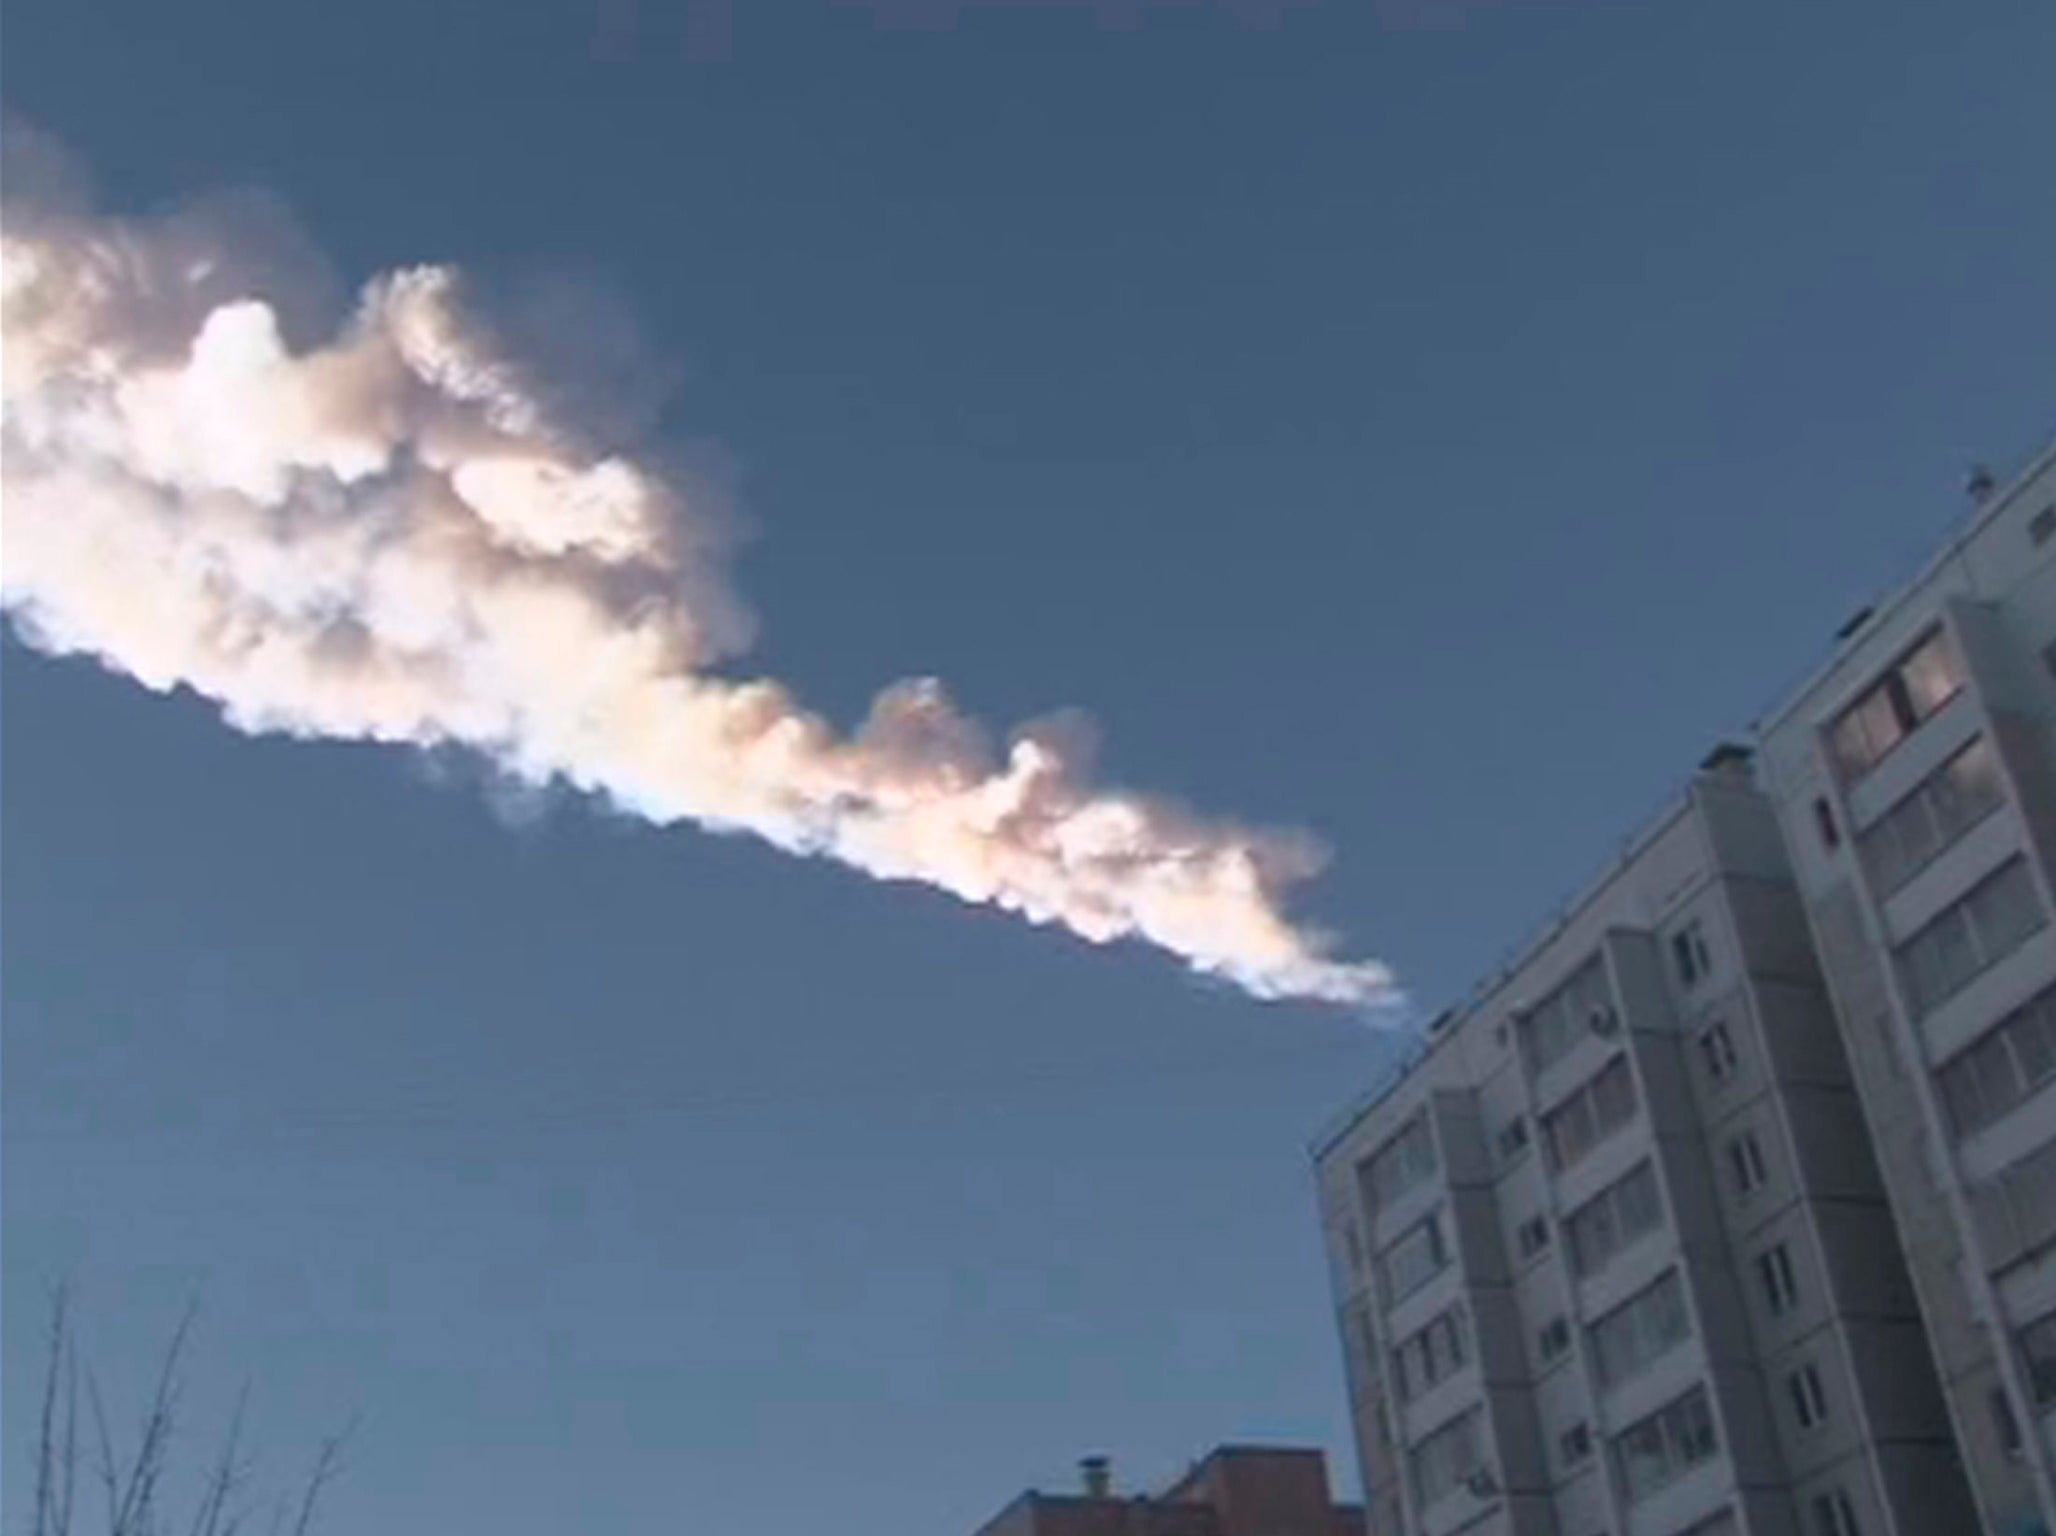 The trail of a falling object is seen above a residential apartment block in the Urals city of Chelyabinsk, in this still image taken from video shot on February 15, 2013